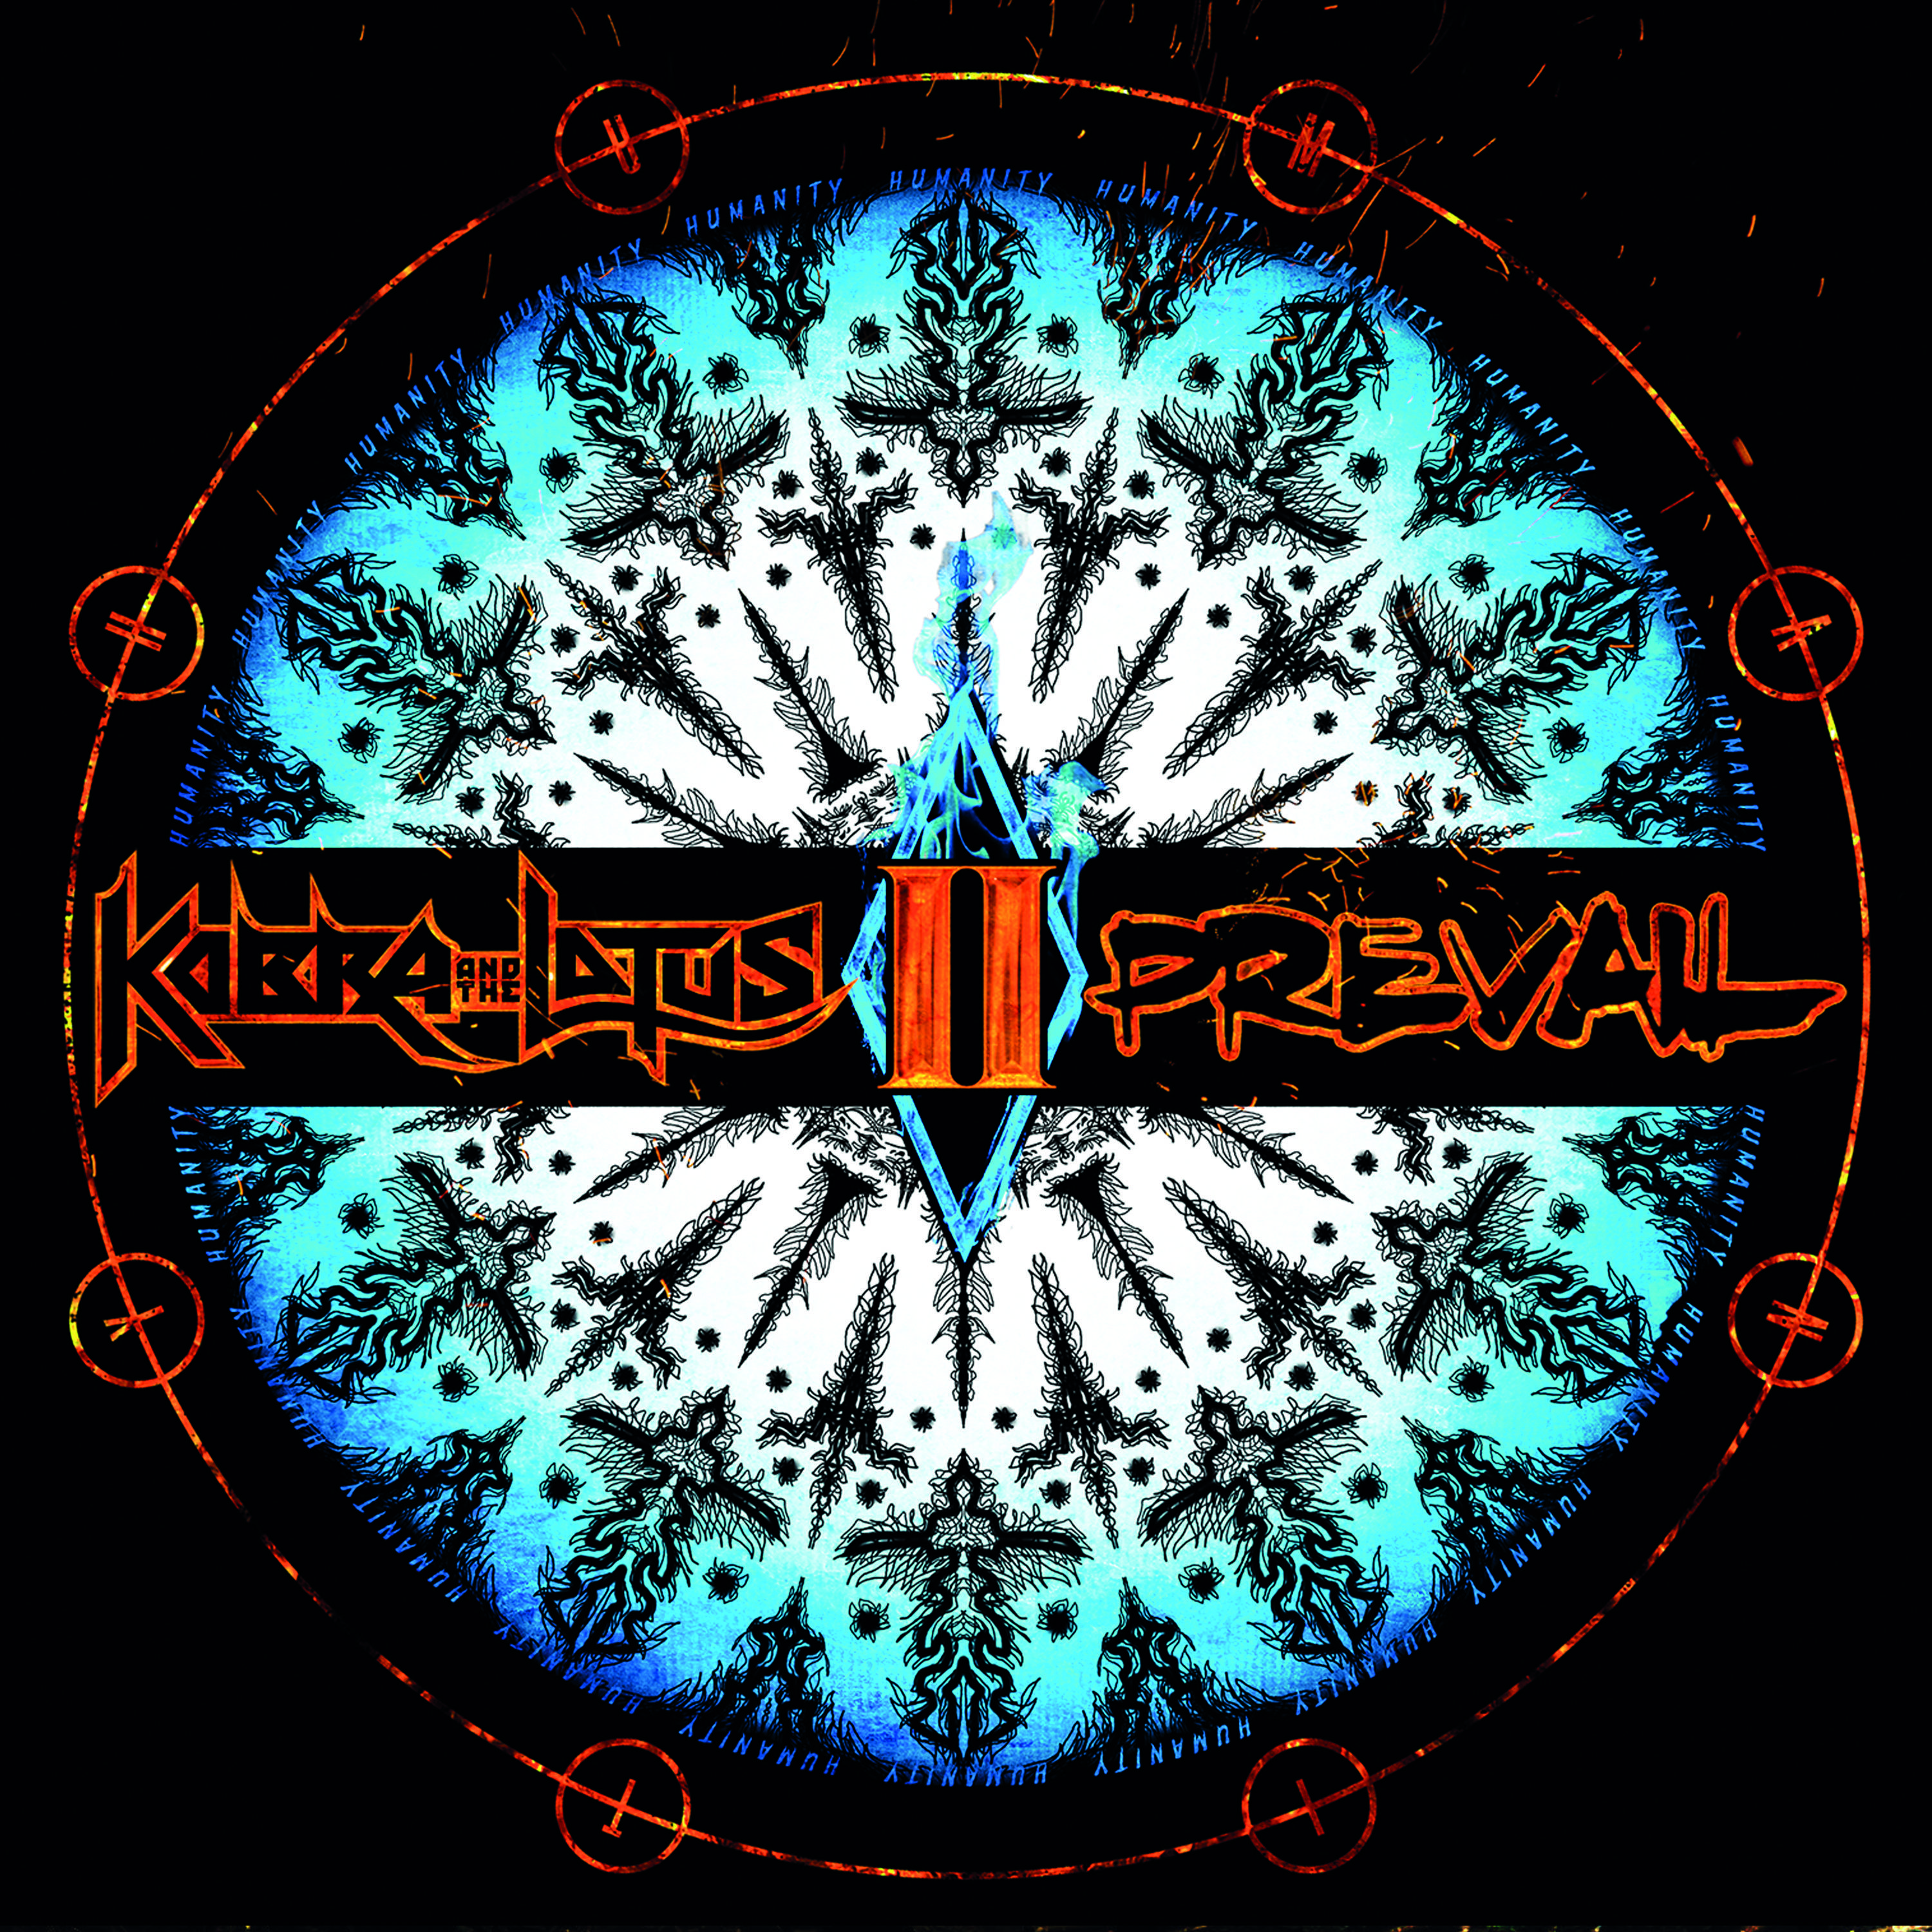 KOBRA AND THE LOTUS Release First Lyric Video For "Losing My Humanity" via Bravewords